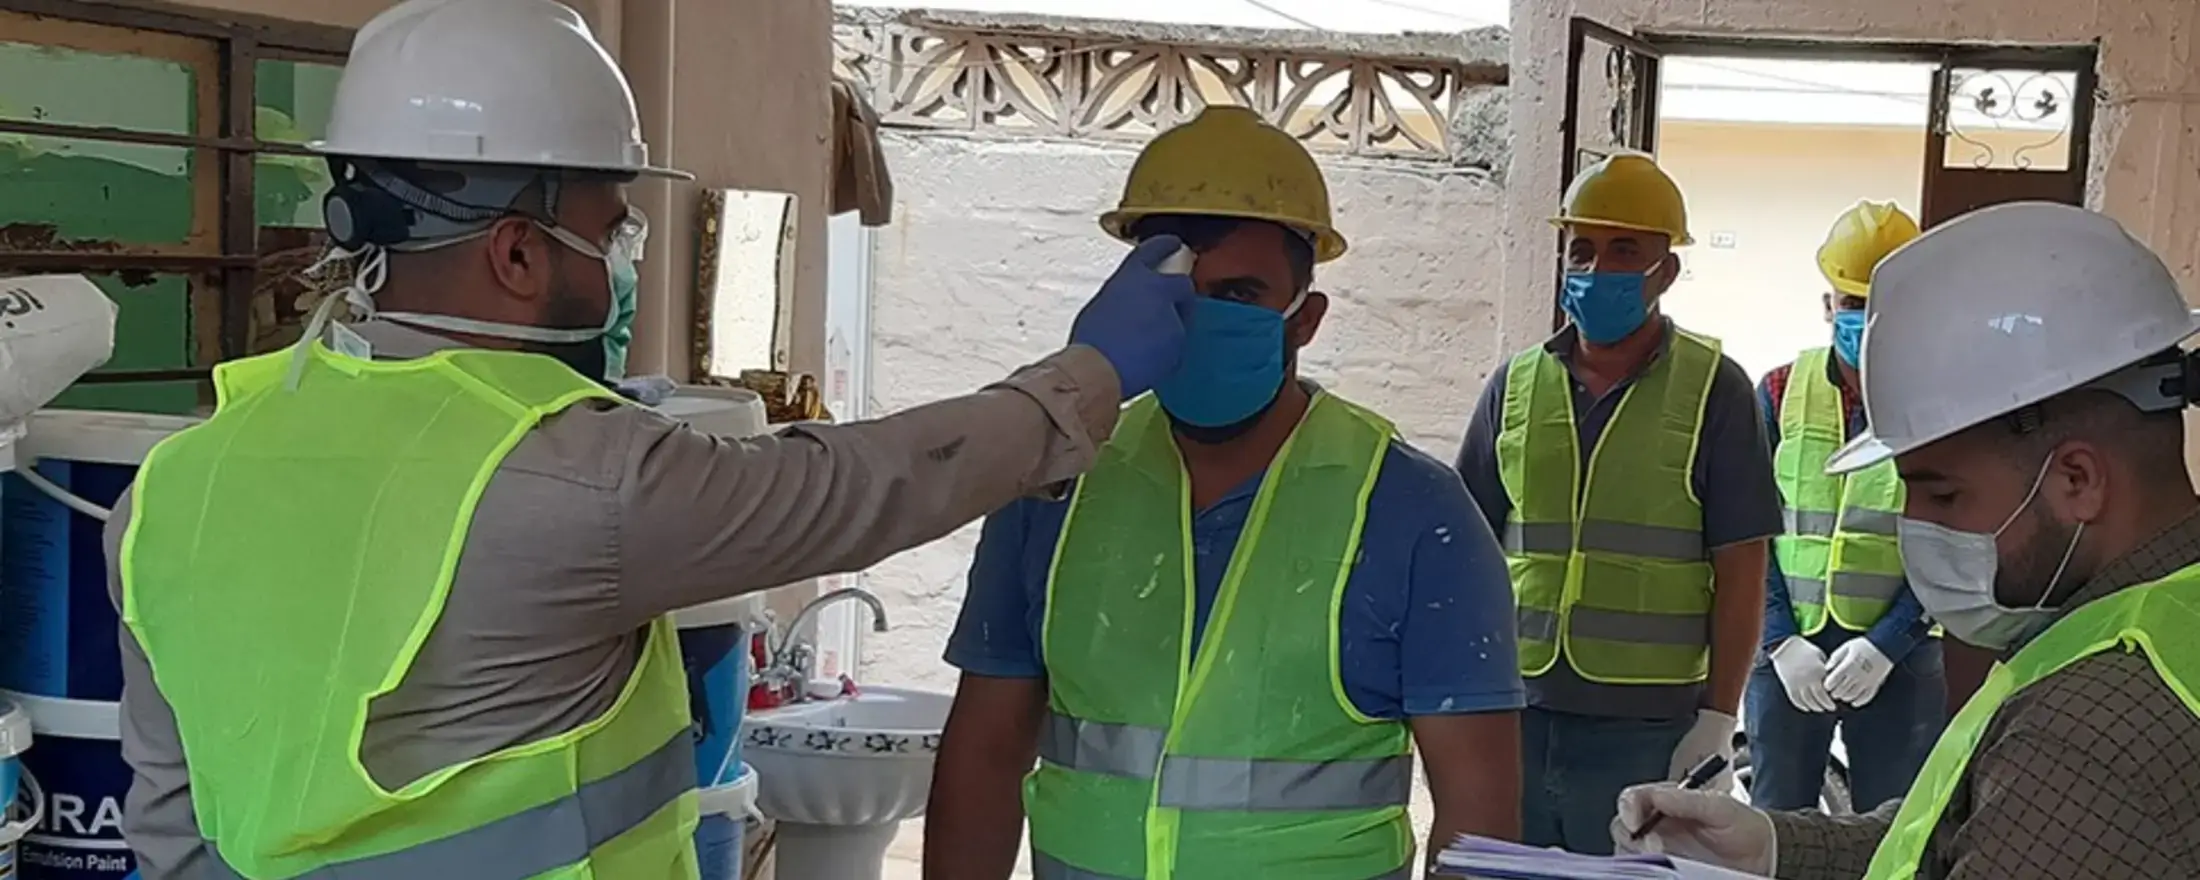 Construction work has resumed on a UN-Habitat project to rehabilitate war damaged houses in Mosul in northern Iraq with protection measures against COVID-19